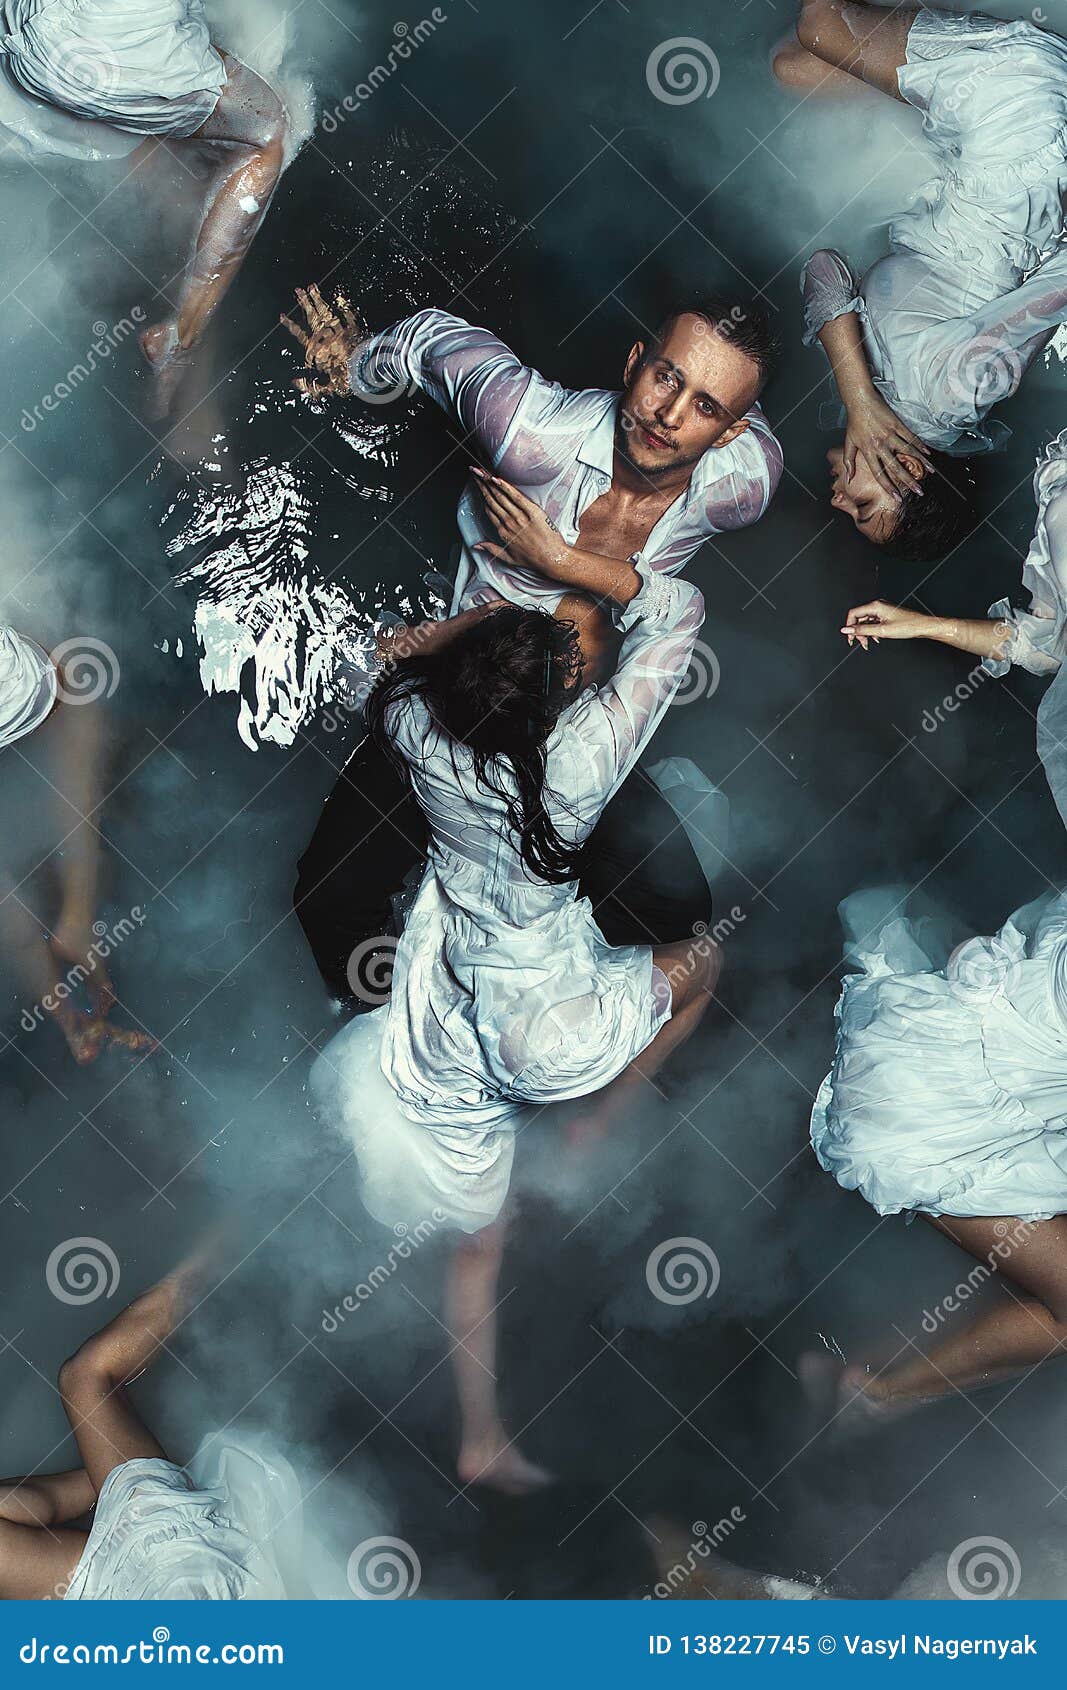 Fine Art Imagery. Selender Mythical Young Beautiful Sirens Pulling a Young  Attractive Guy Under the Water Stock Image - Image of siren, ocean:  138227745